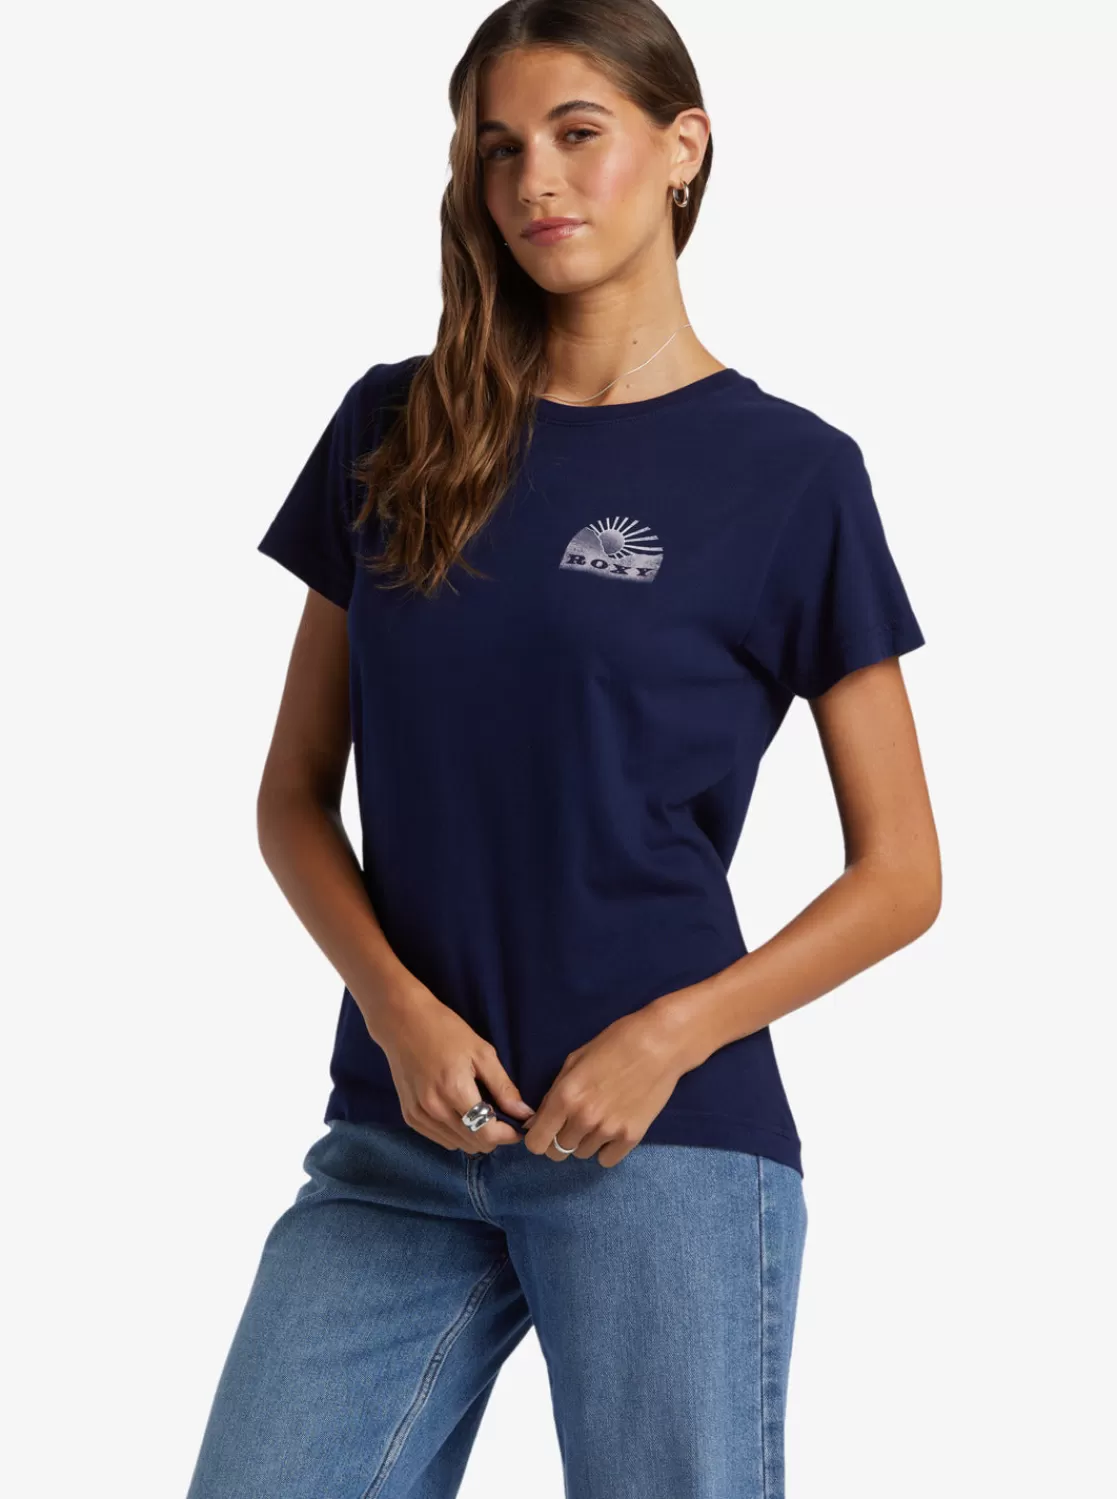 Get Lost In The Moment Boyfriend T-Shirt-ROXY Store